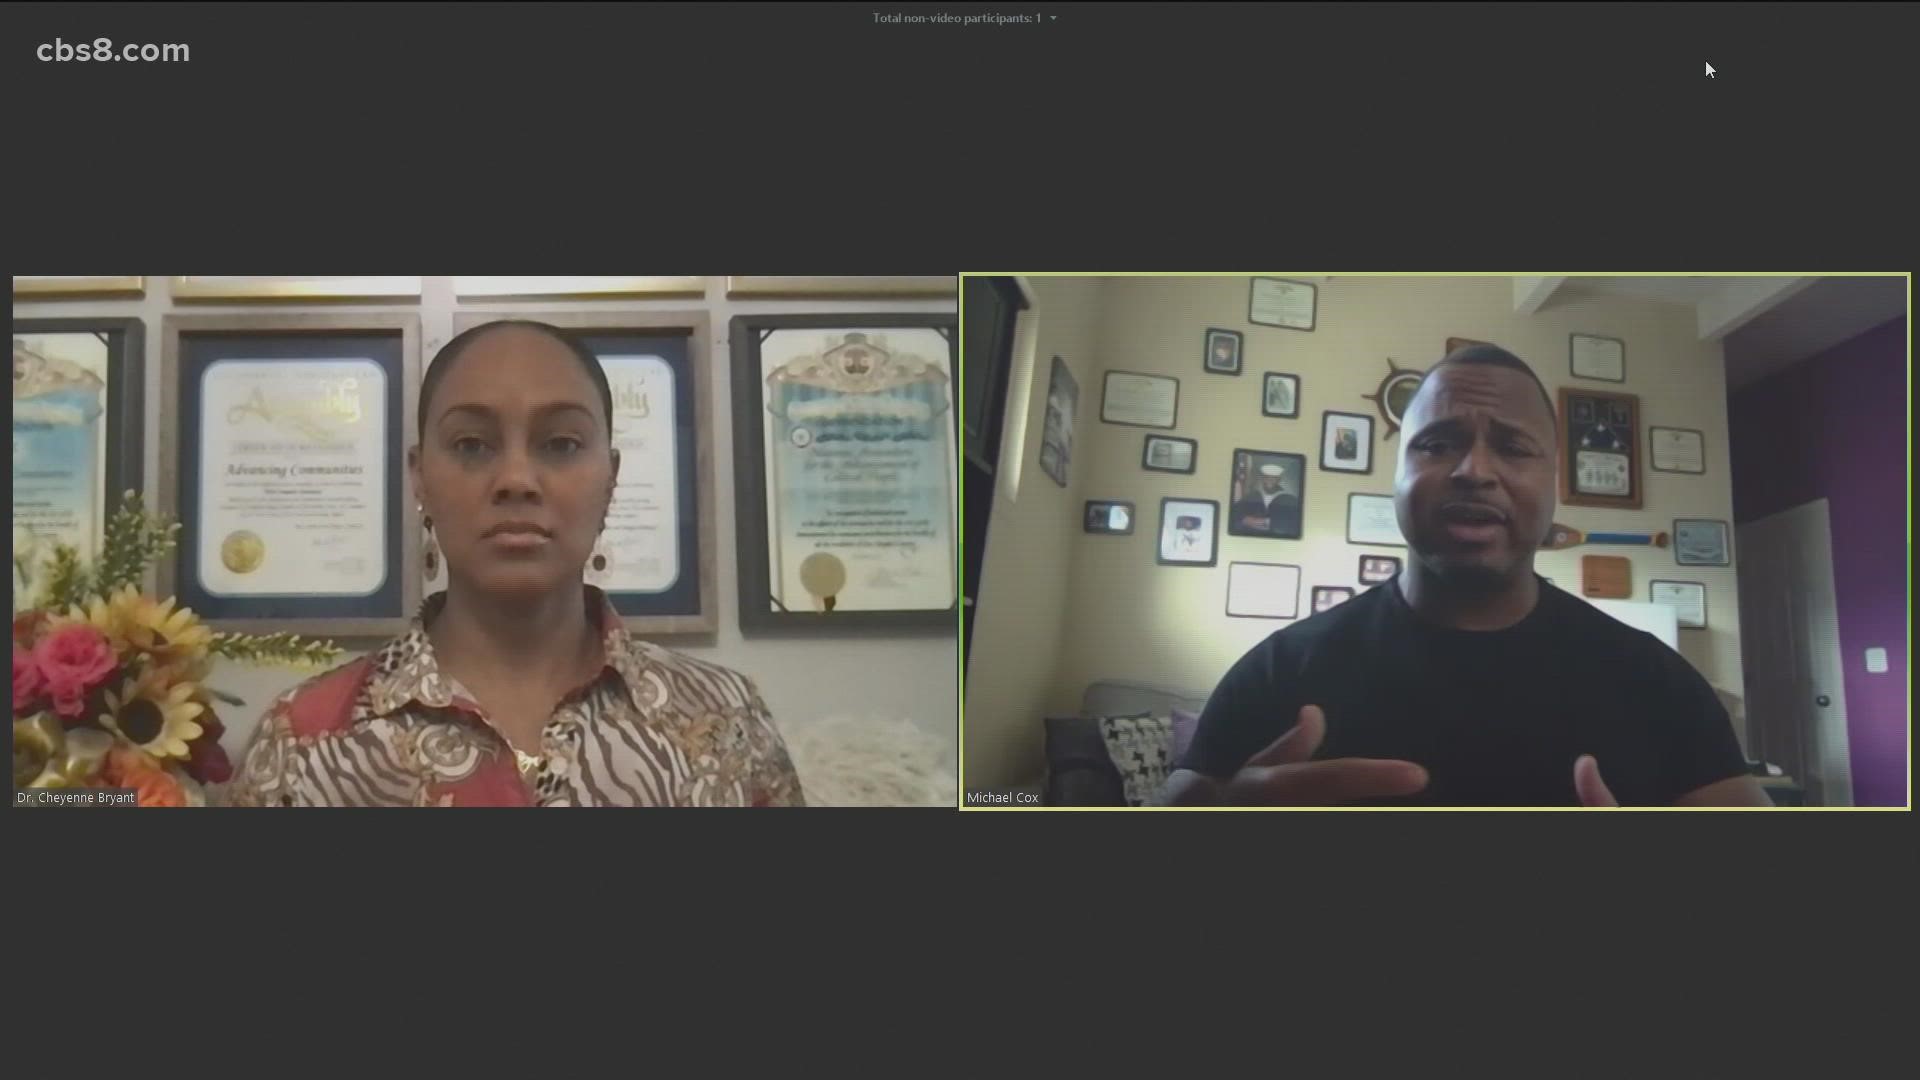 CEO & Publisher of "The Official Black Magazine" Michael Cox along with Dr. Cheyenne Bryant talk about mental health.